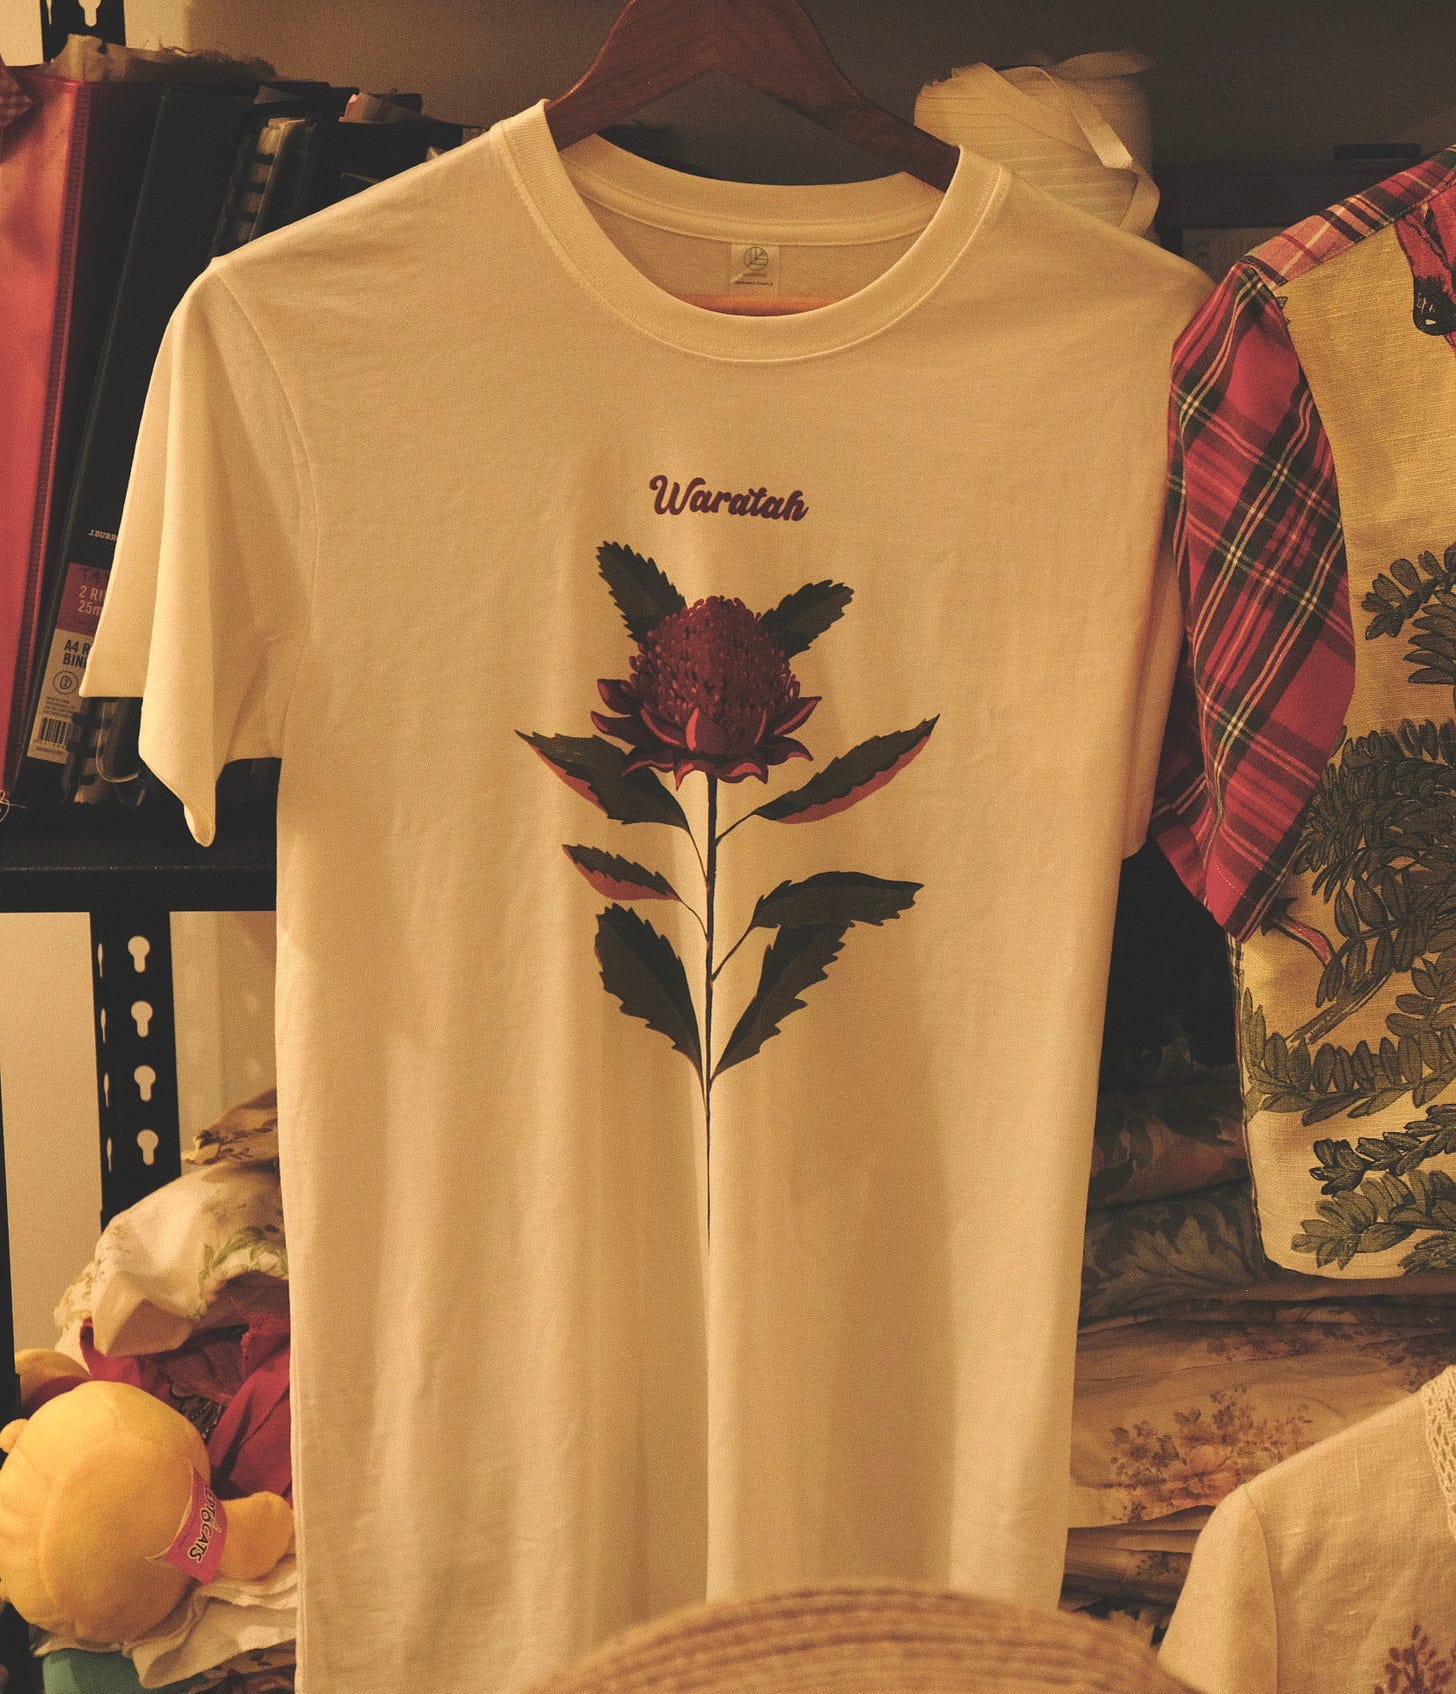 Photo of the Waratah Tee by House of Clare